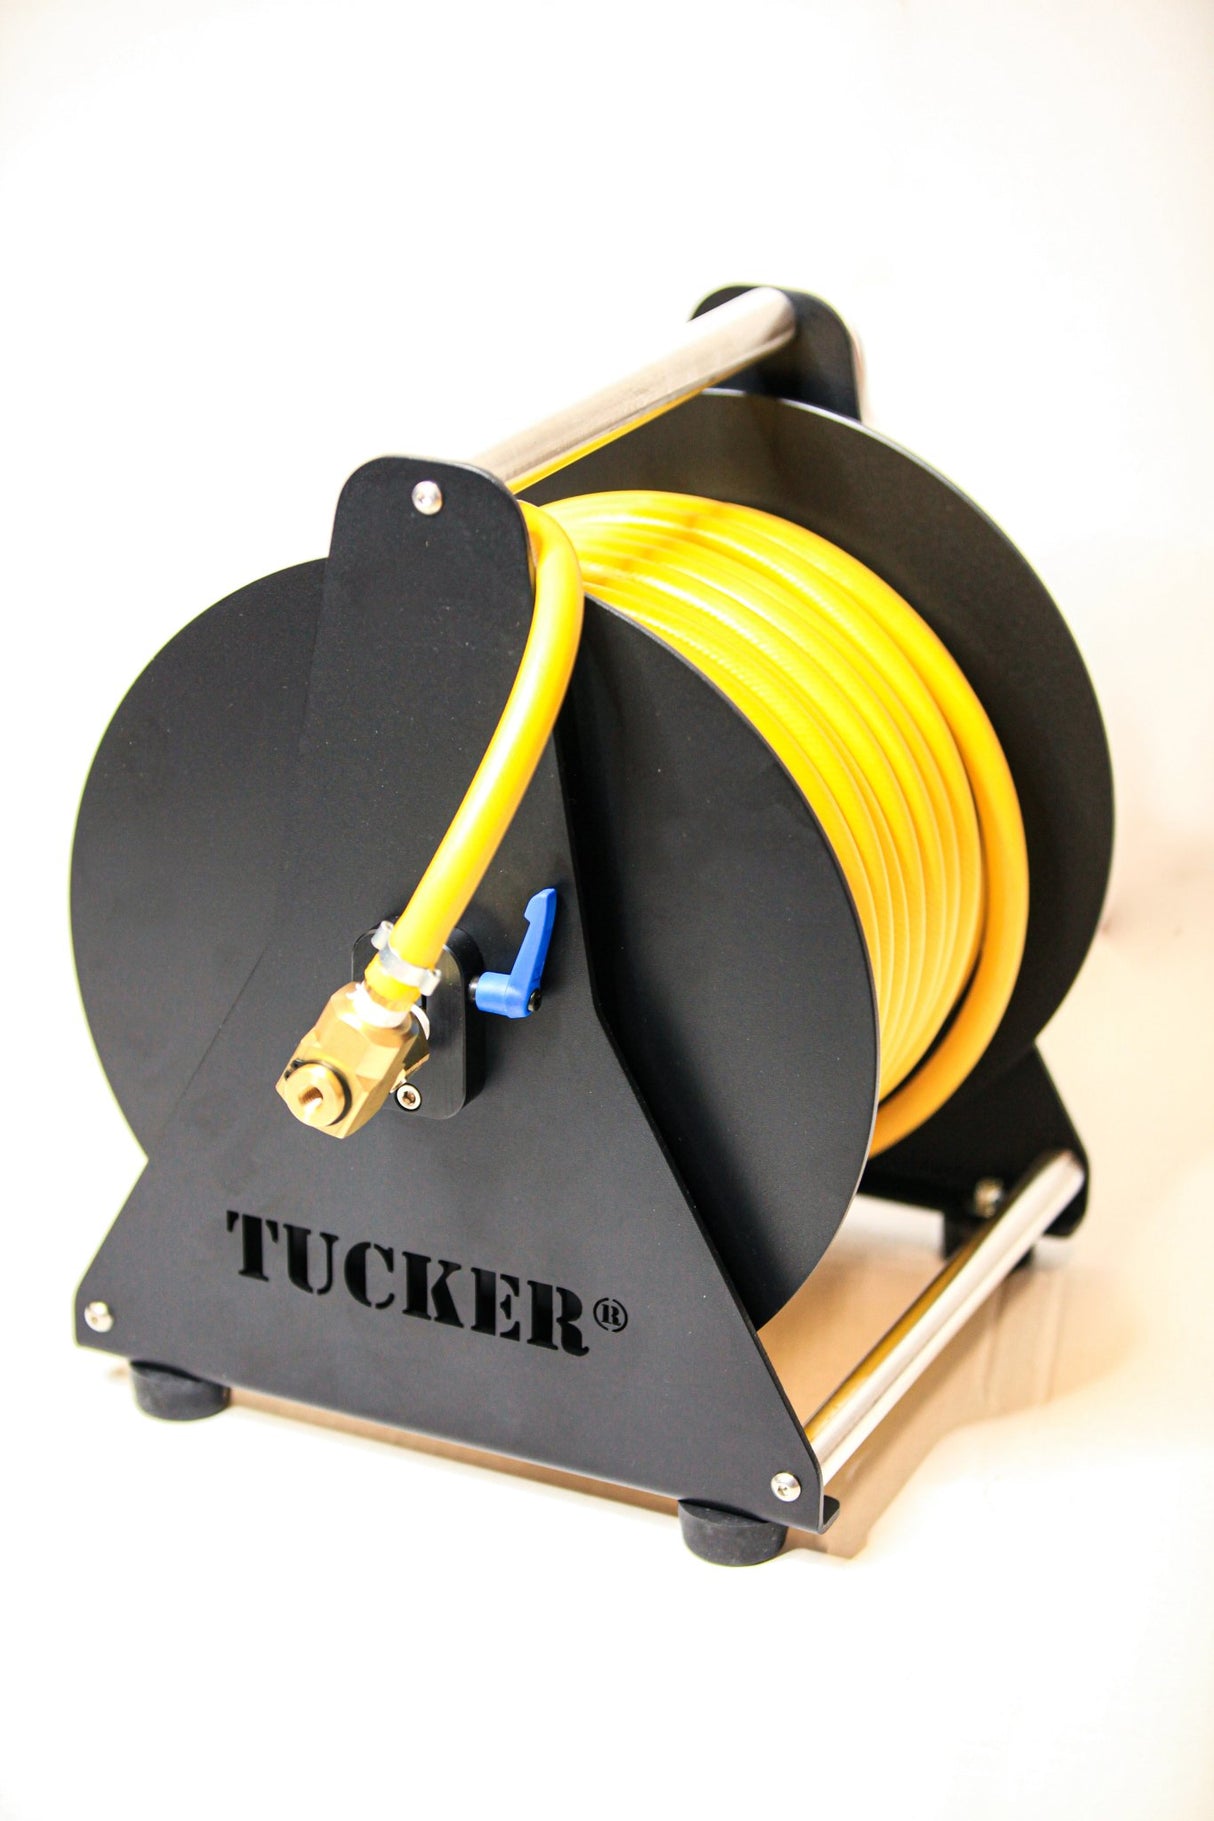 The ULTIMATE Commercial Kit 60' - Tucker® USA#